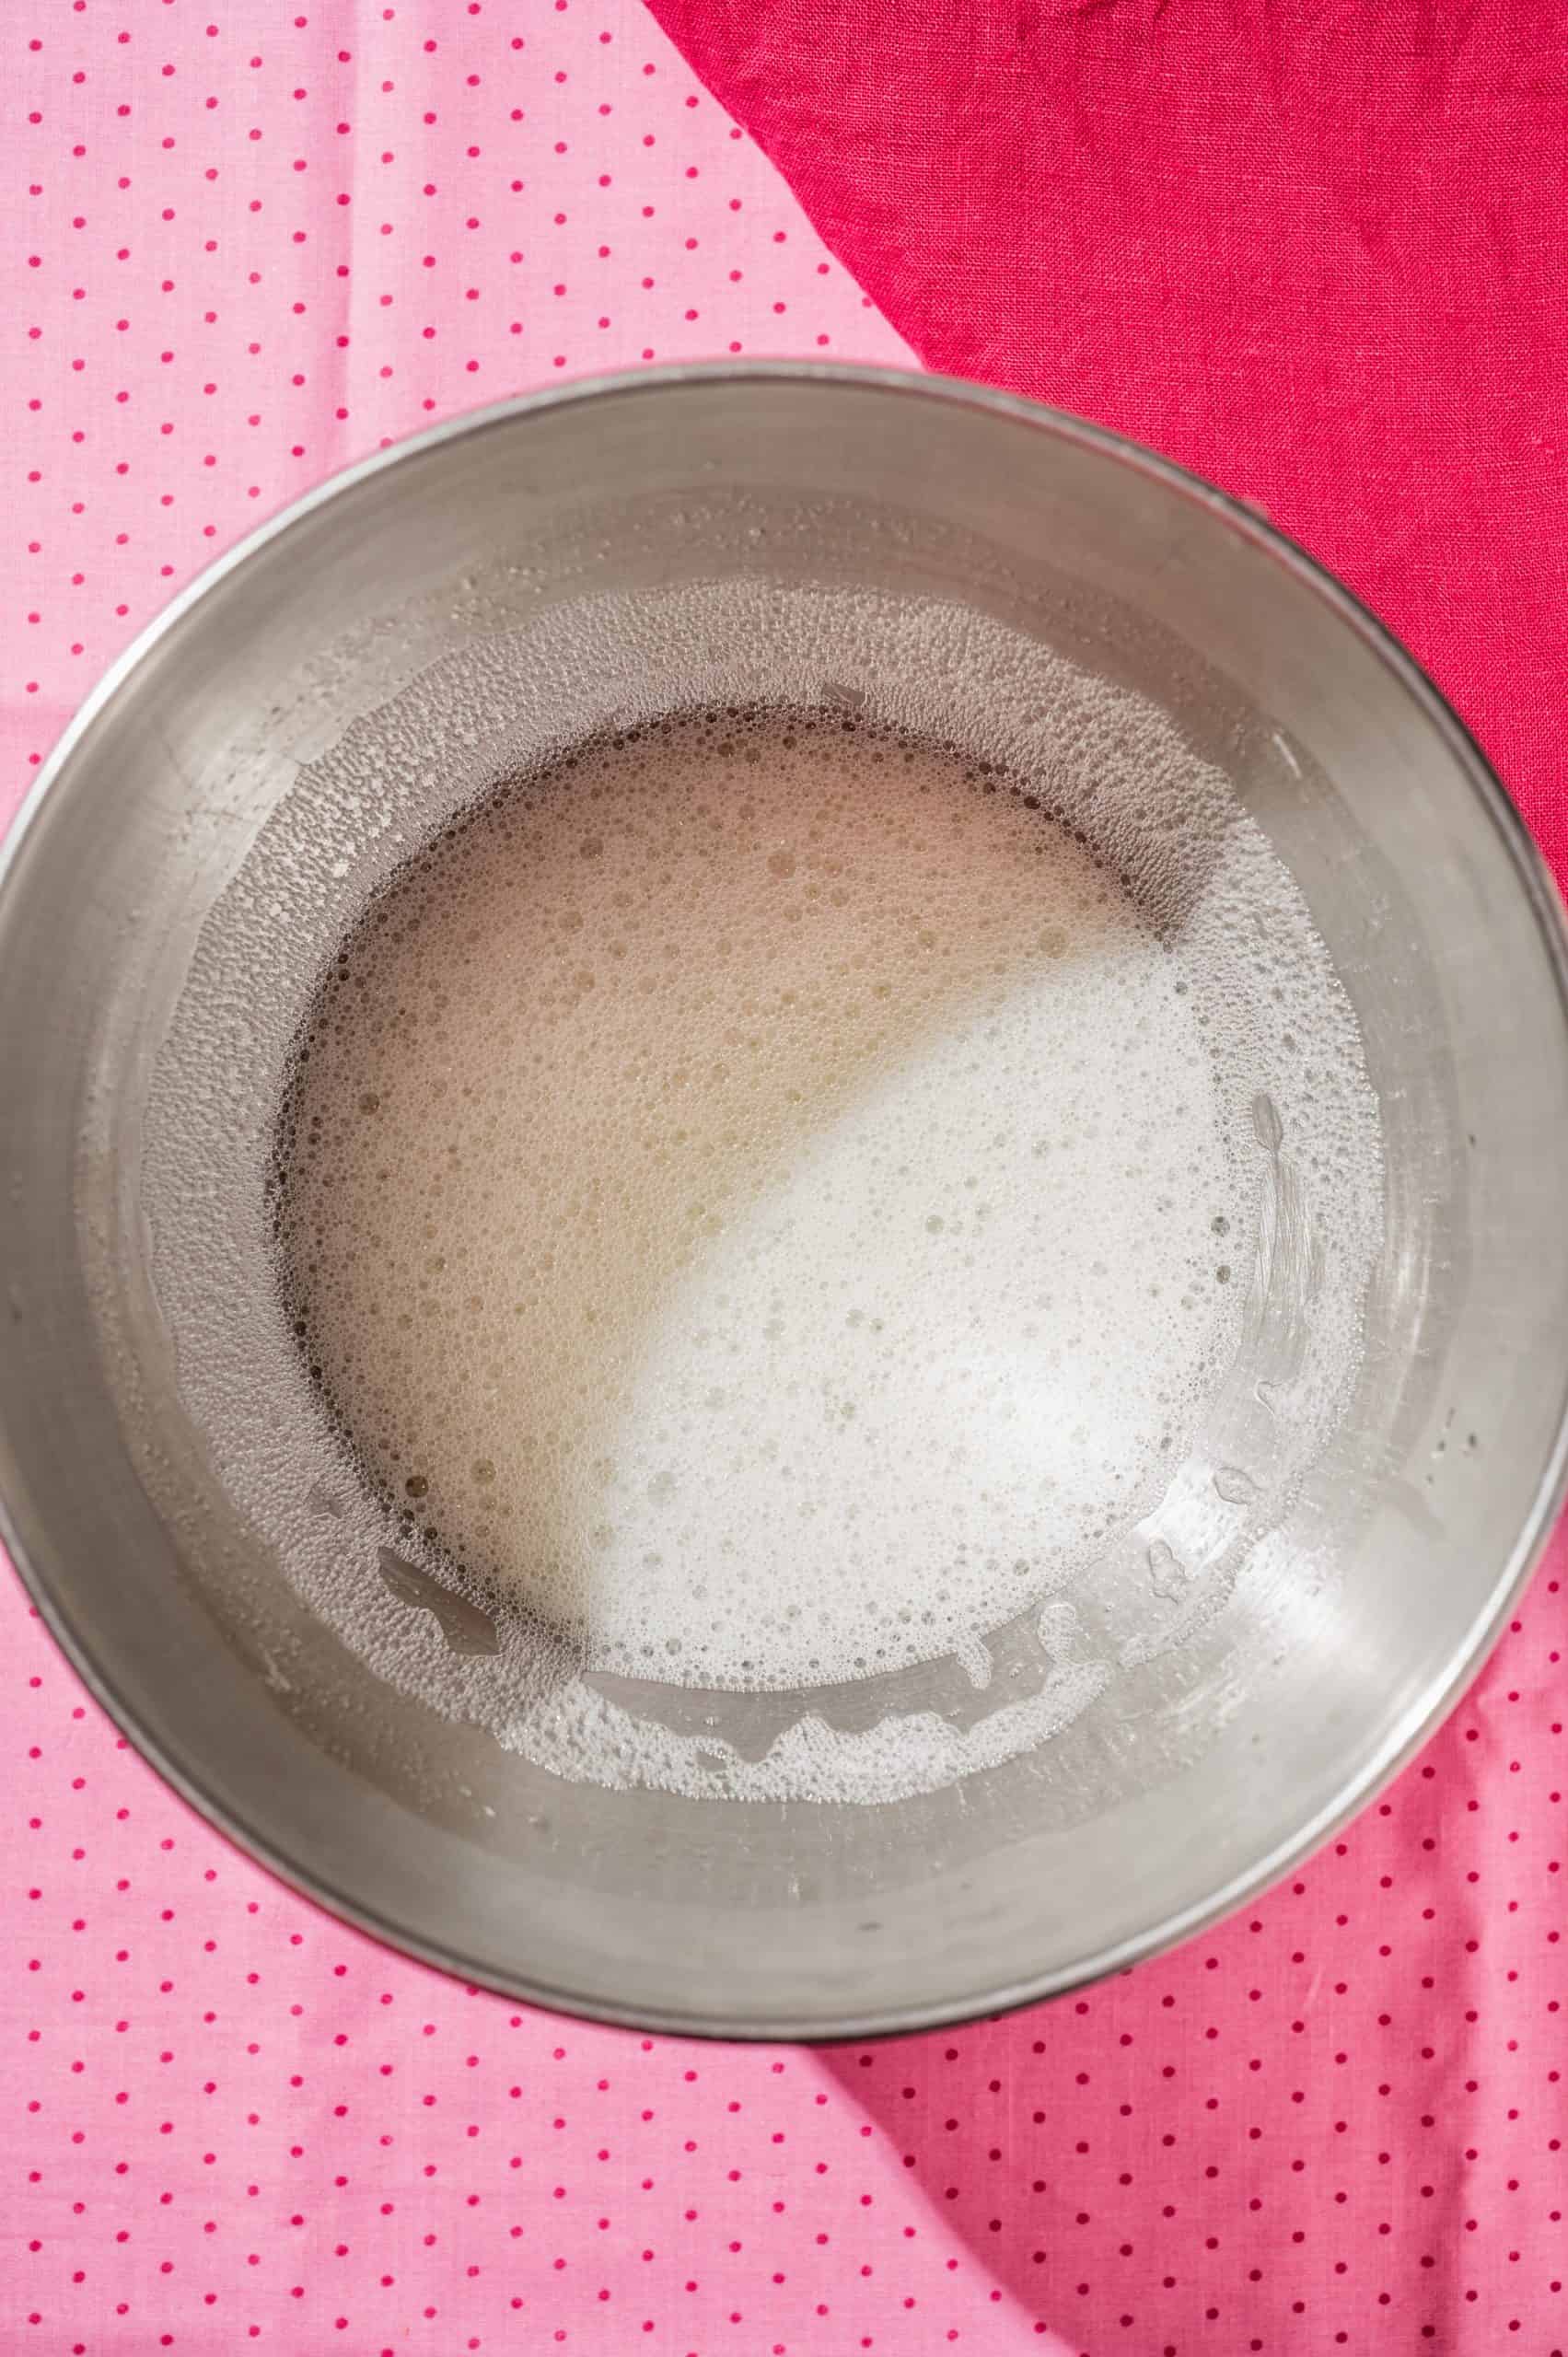 whipped frothy egg whites in the bowl of a stand mixer